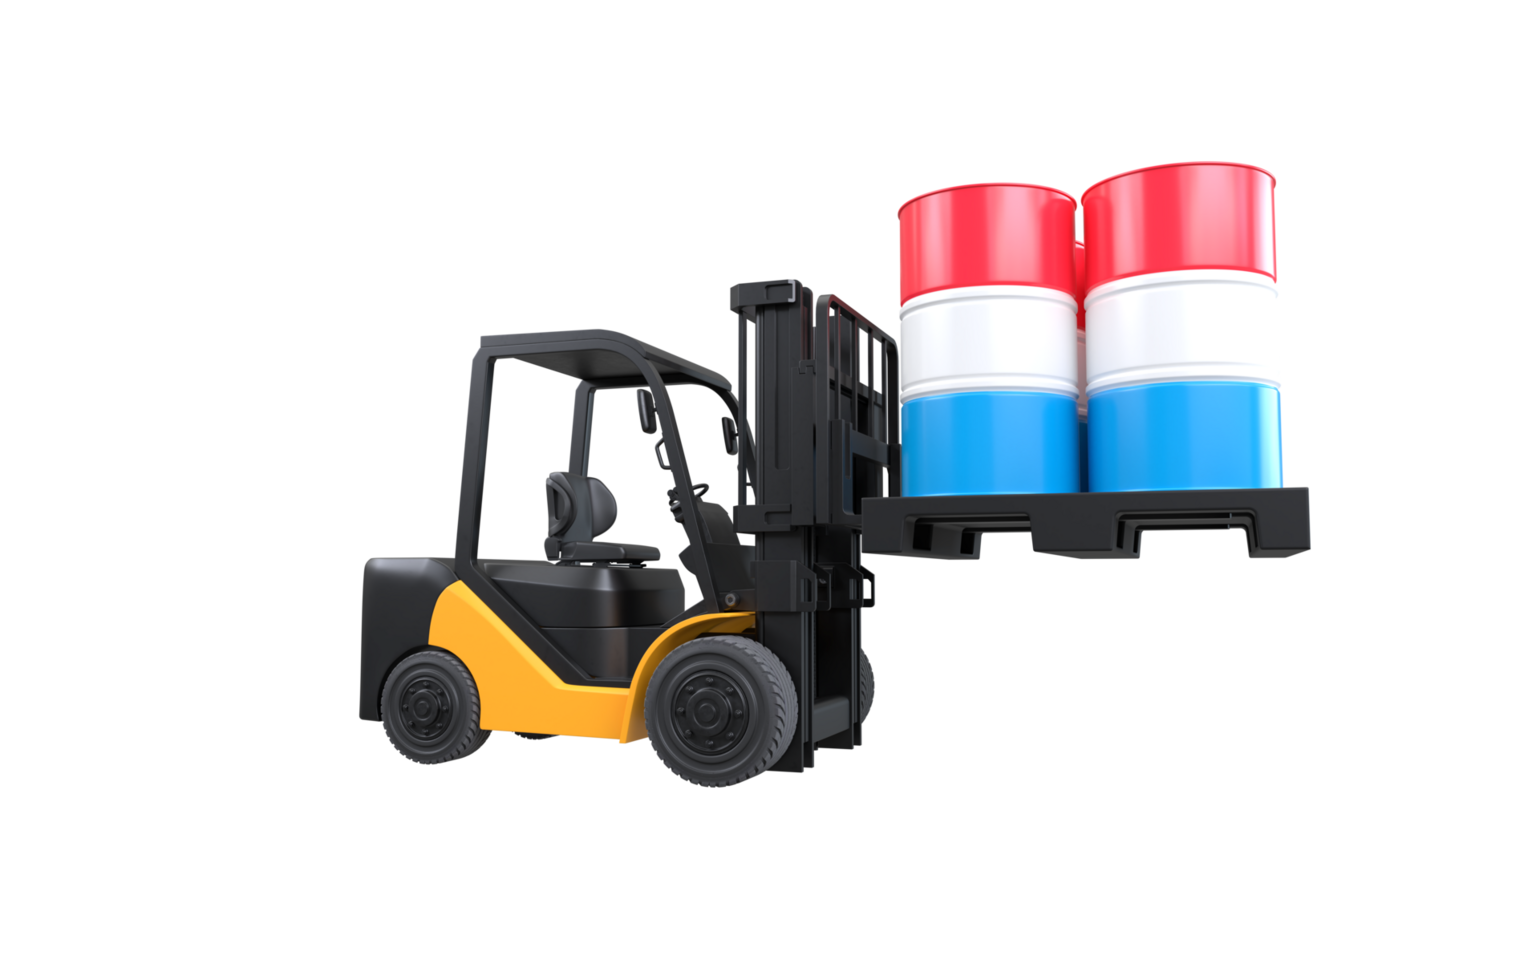 Forklift lifting fuel tank with Luxembourg flag on transparent background, PNG file